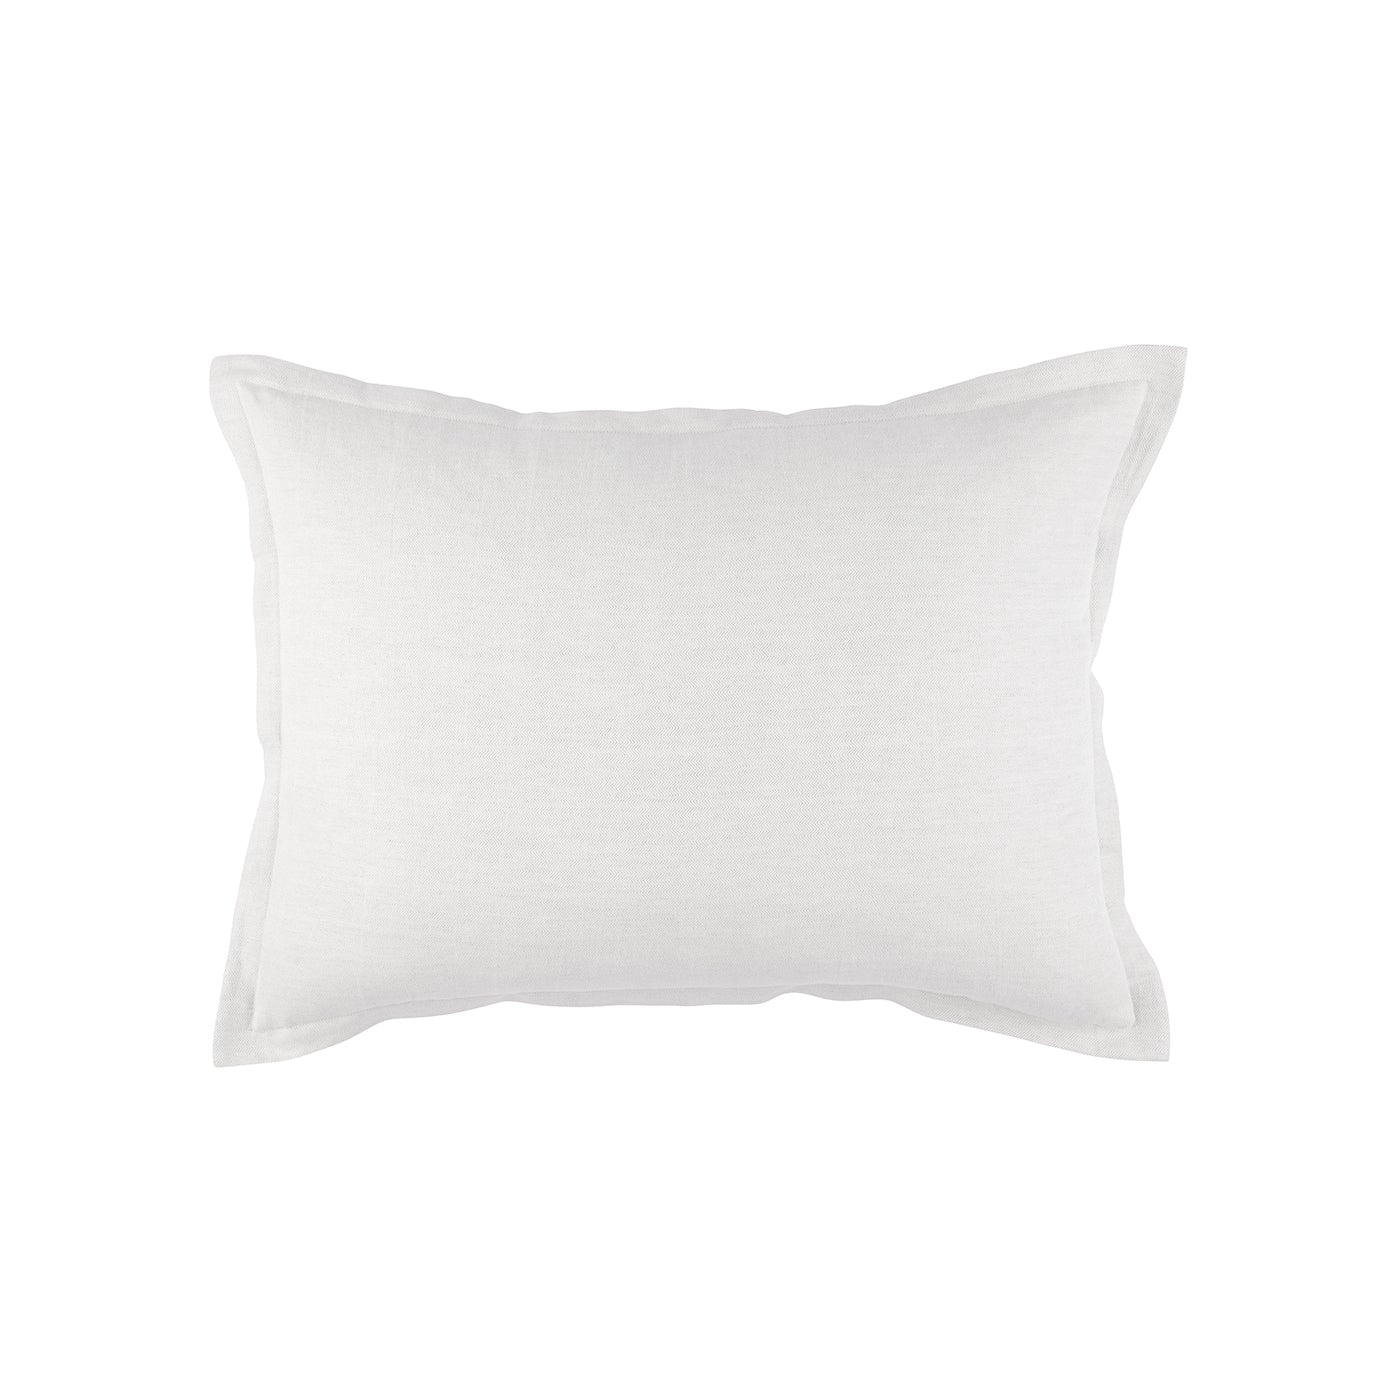 Rain White Standard Pillow by Lili Alessandra | Fig Linens and Home